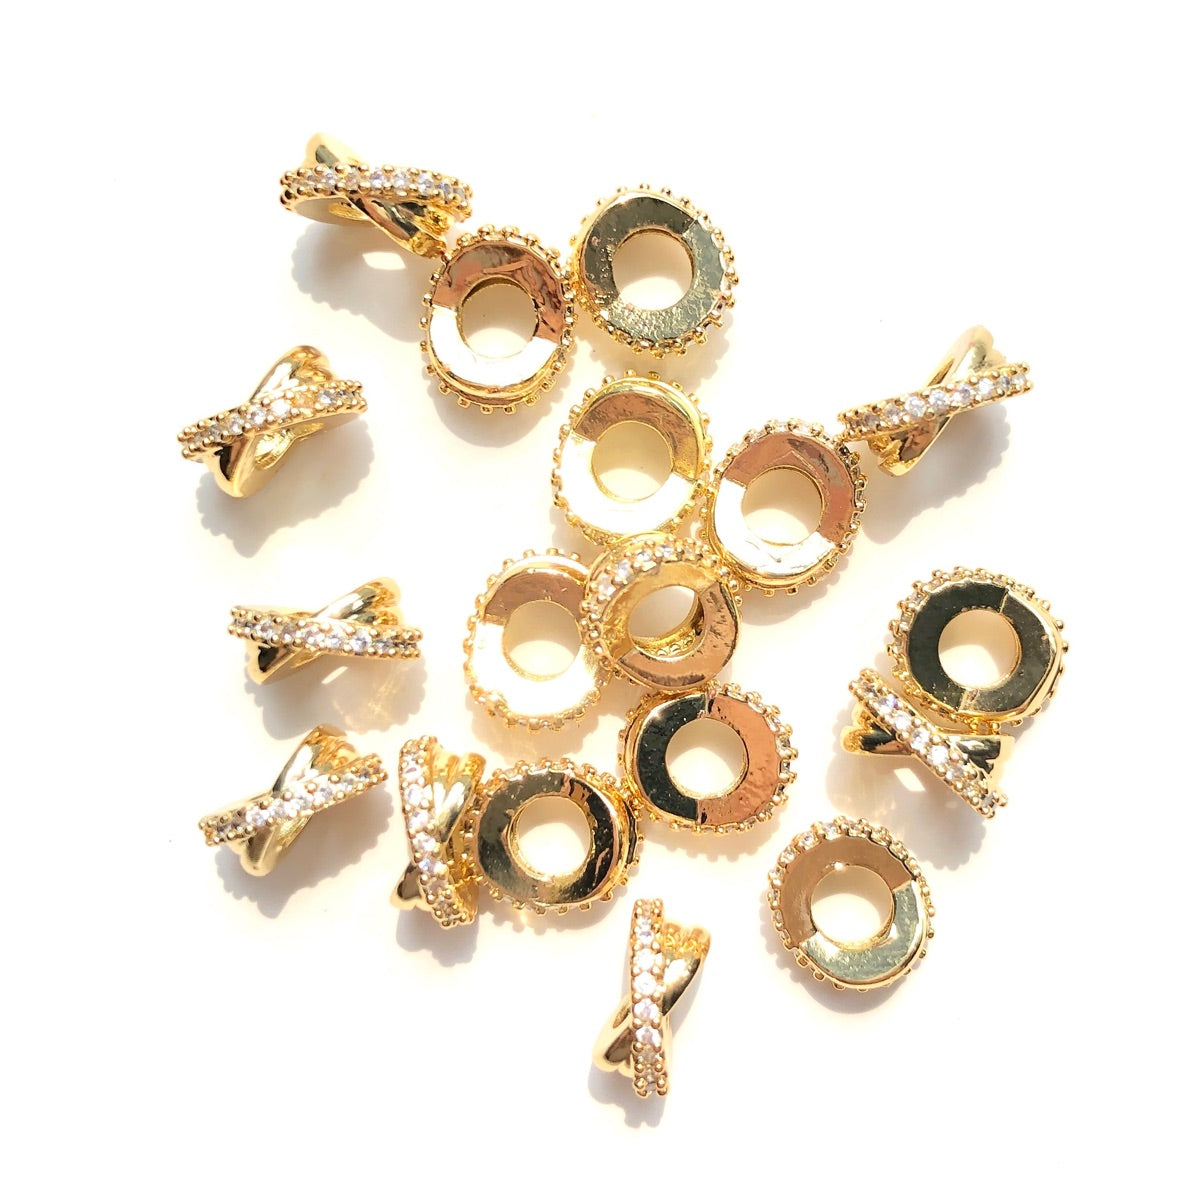 20-50pcs/lot 10*4.5mm CZ Paved Big Hole Rondelle Wheel Spacers Gold CZ Paved Spacers New Spacers Arrivals Rondelle Beads Wholesale Charms Beads Beyond